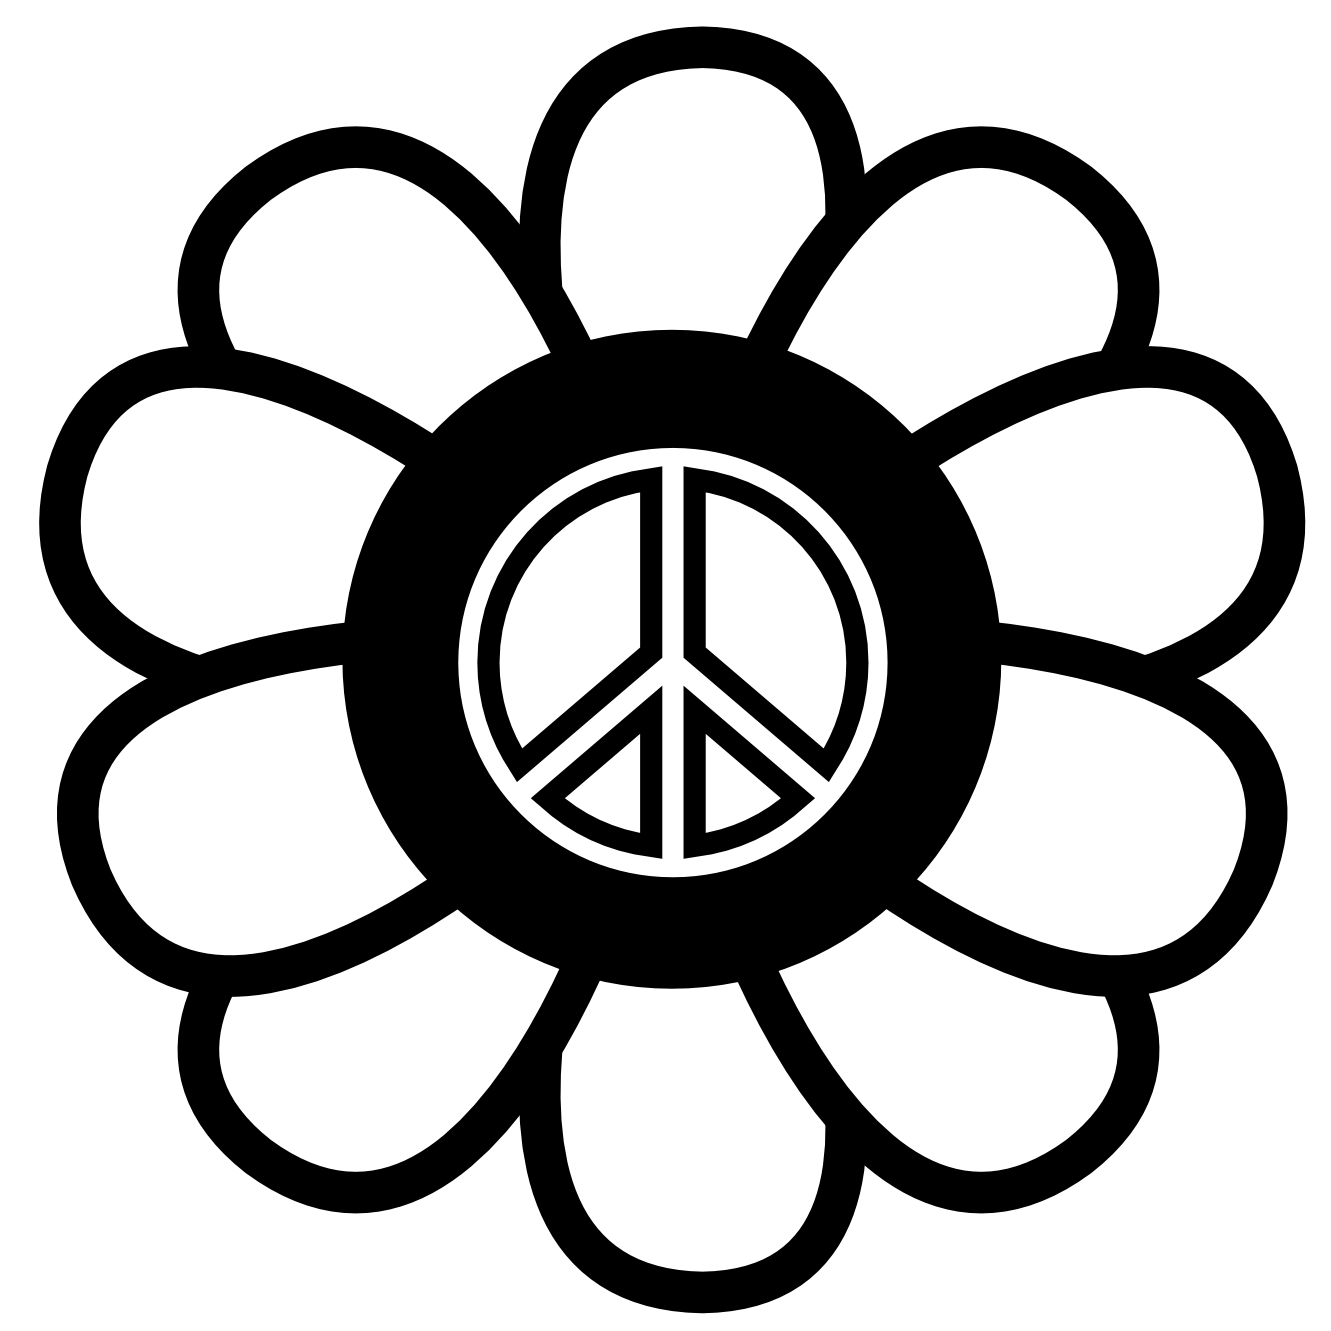 Printable Peace Signs - ClipArt Best